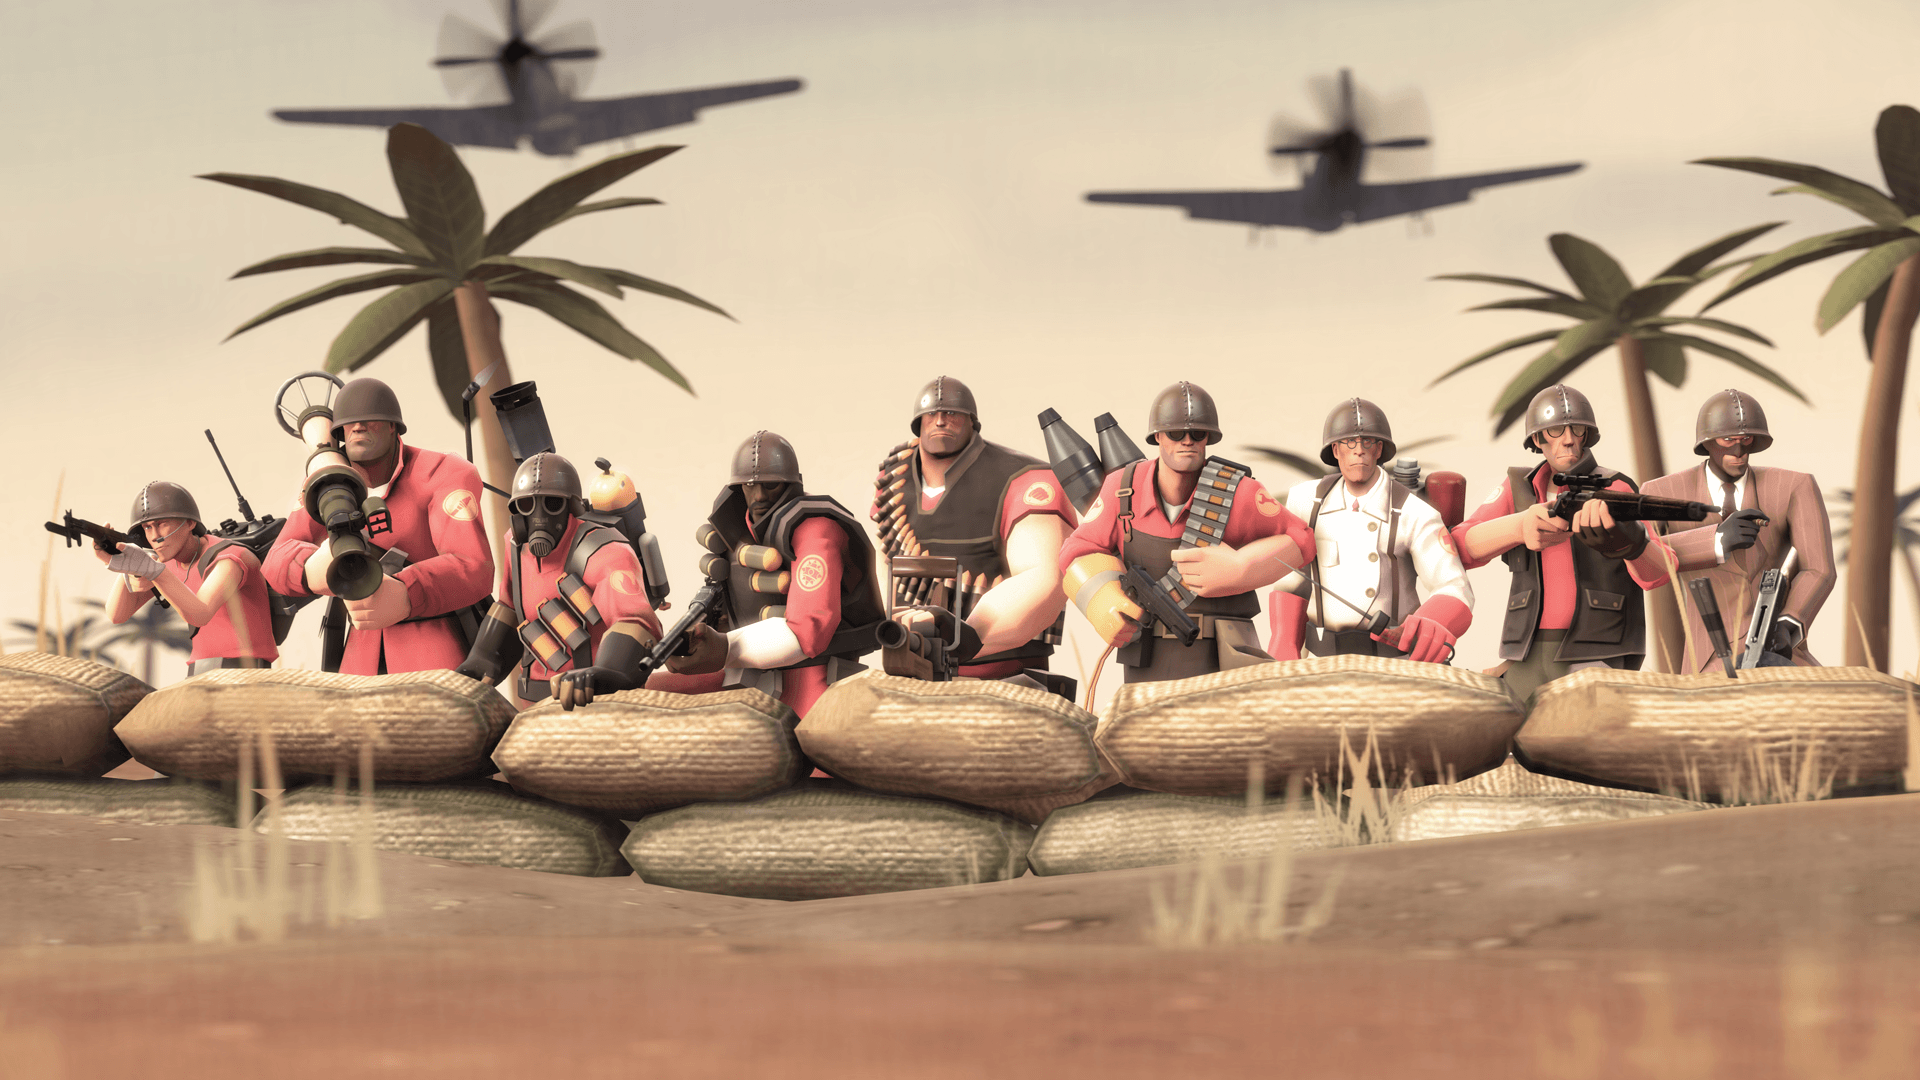 Free Team Fortress 2 Wallpapers